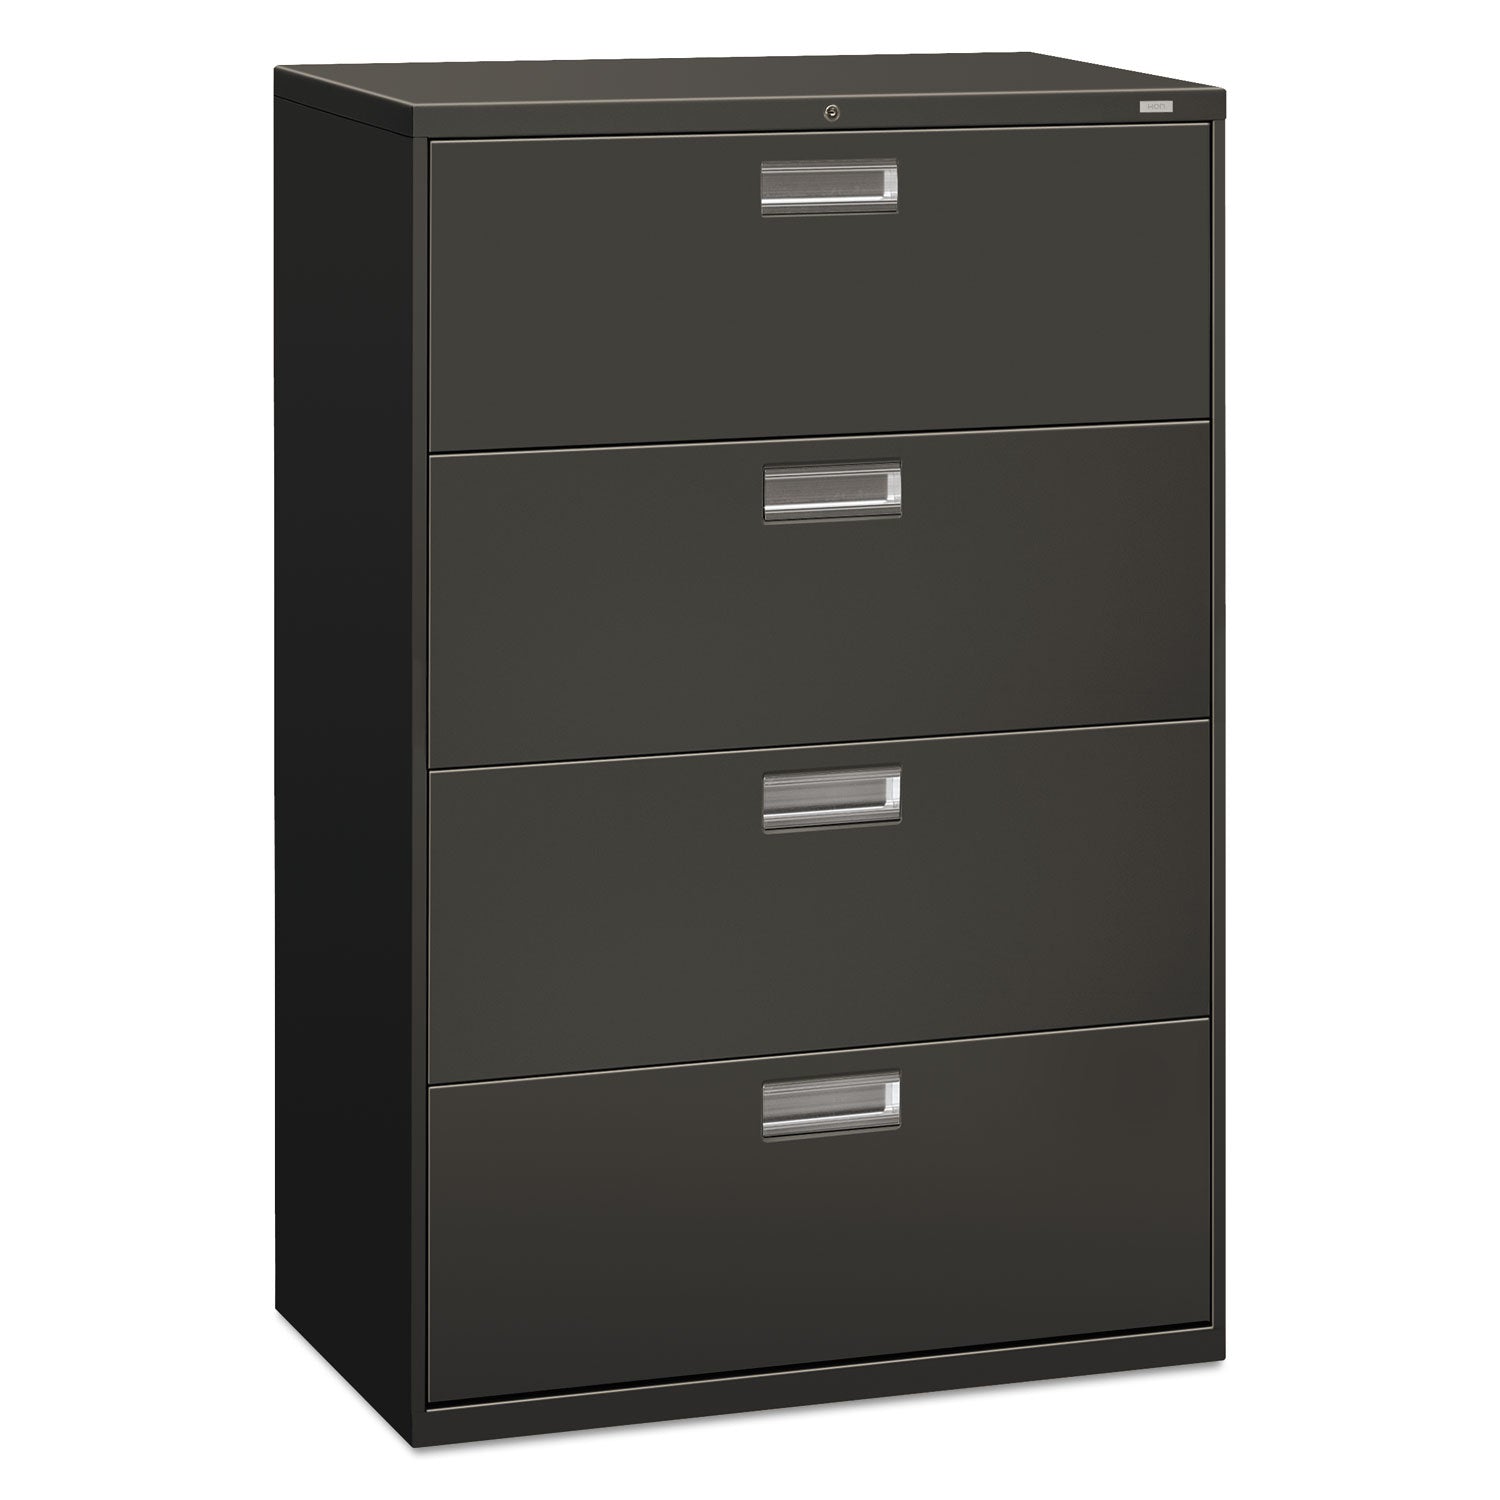 Brigade 600 Series Lateral File, 4 Legal/Letter-Size File Drawers, Charcoal, 36" x 18" x 52.5 - 